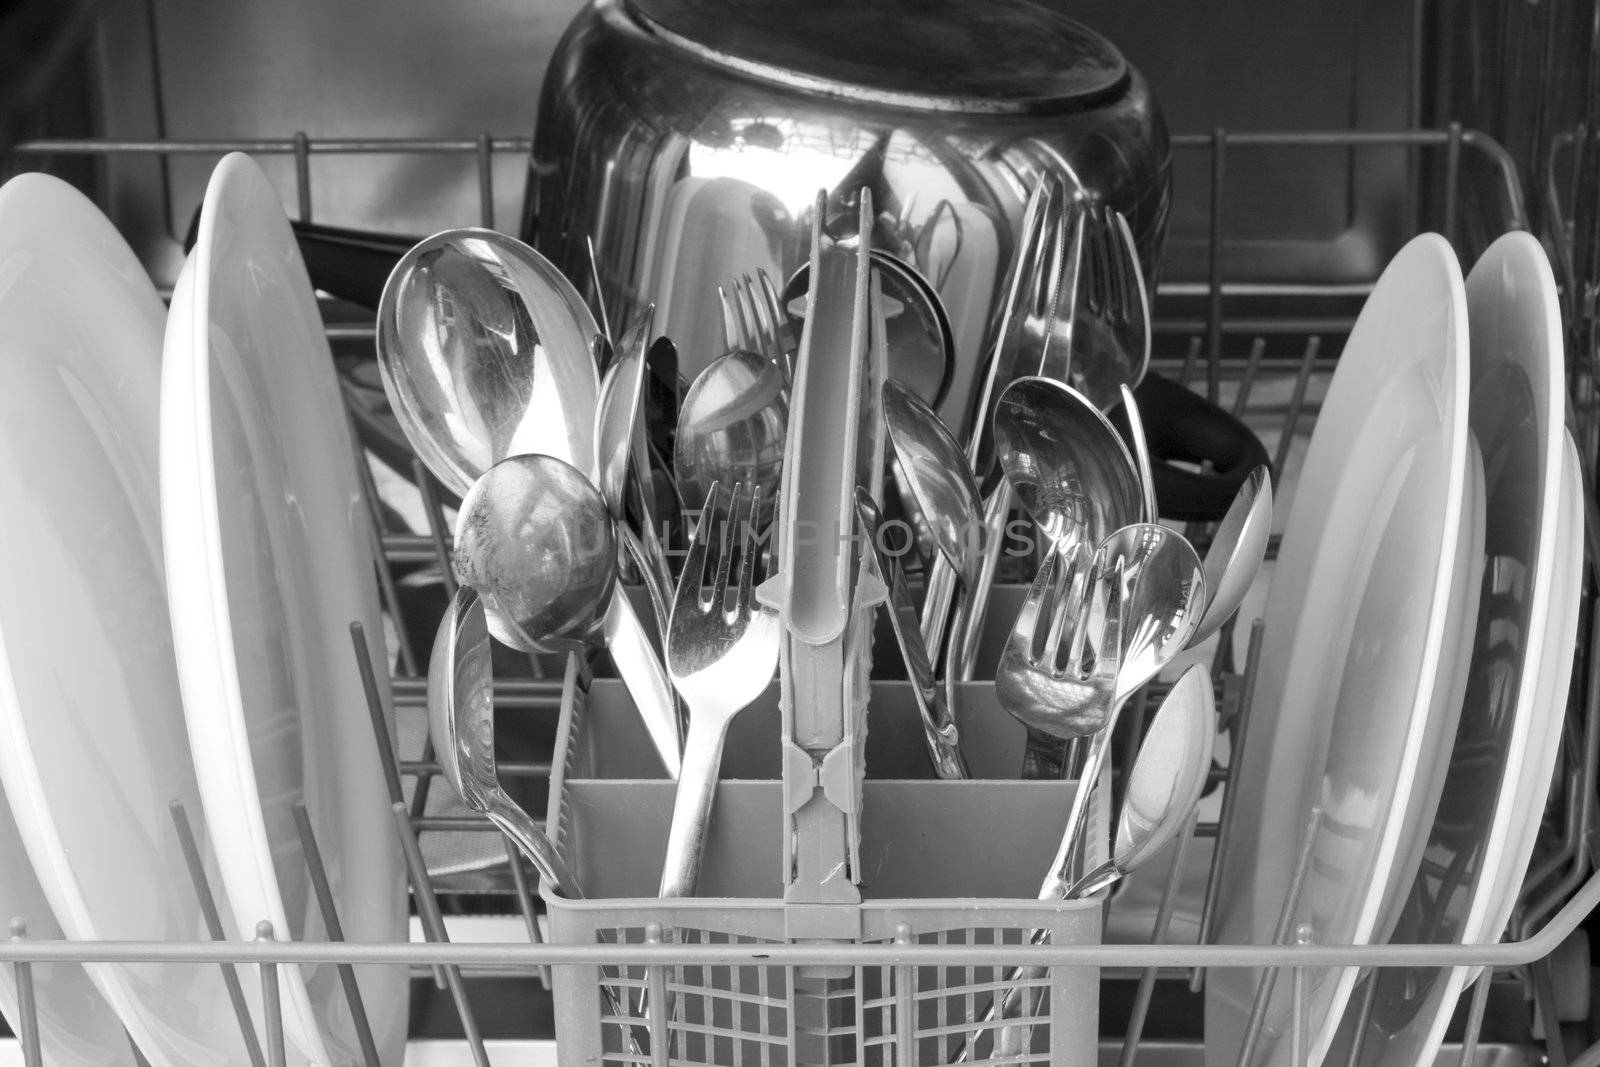 dinnerware and cutlery inside a dishwasher by bernjuer